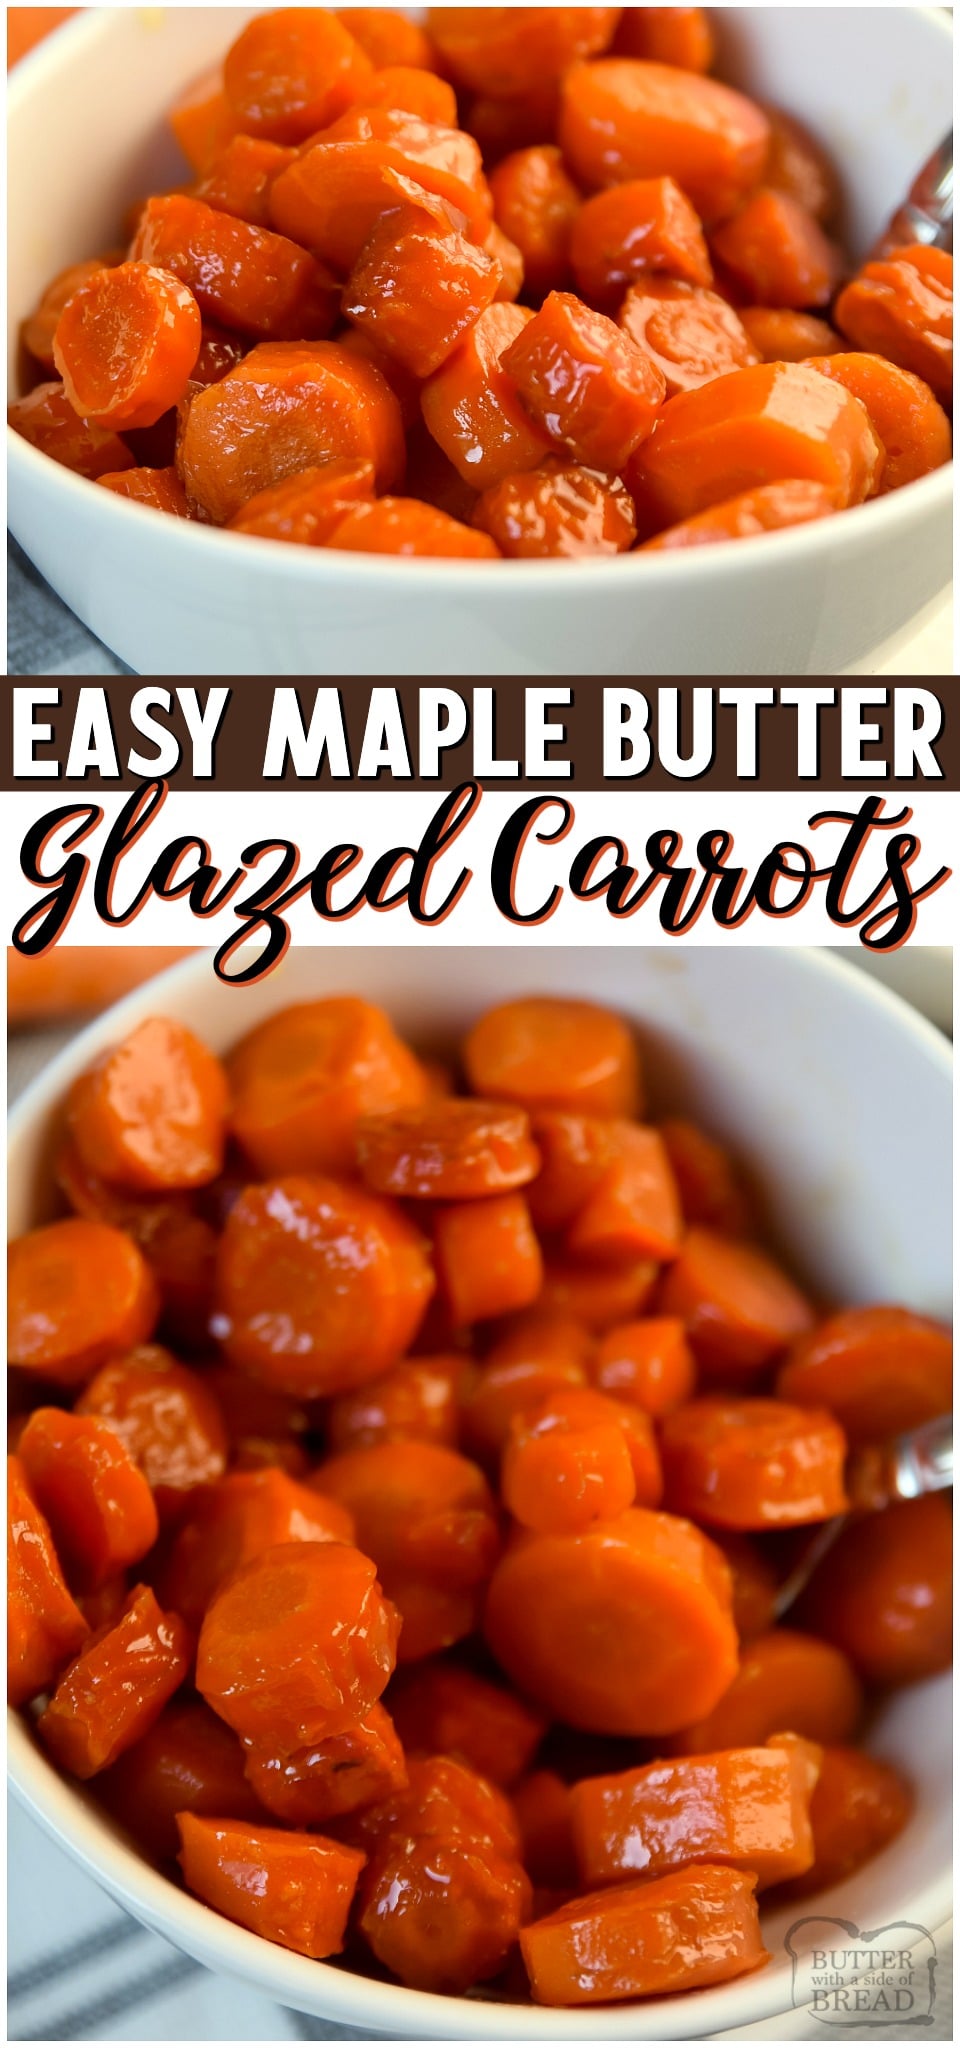 Maple Glazed Carrots~ tender, sweet & the perfect easy vegetable side dish. Glazed Carrots simmered in a sauce of maple syrup and butter & are so simple to make!